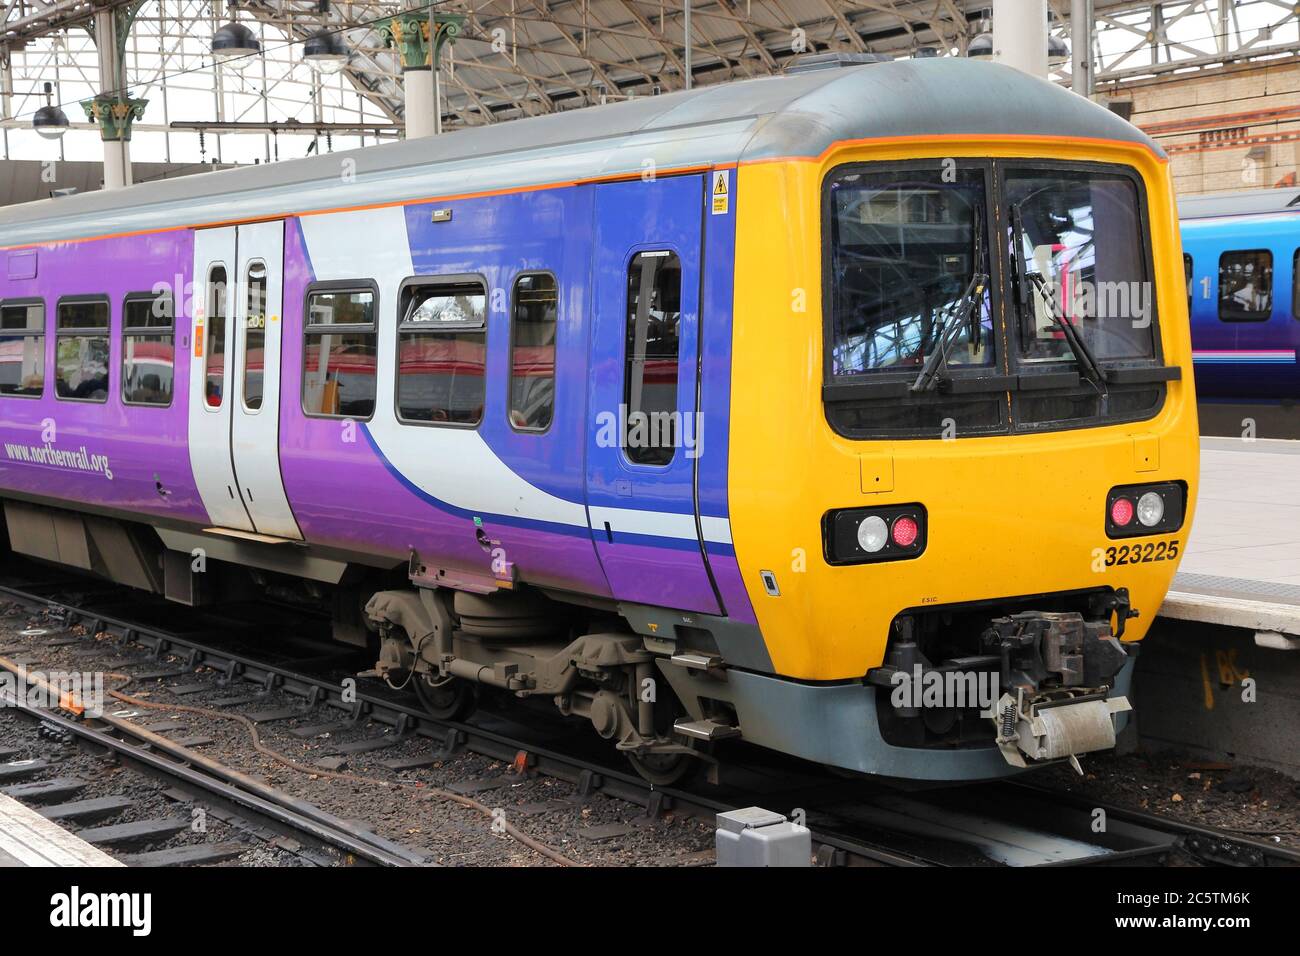 MANCHESTER, UK - APRIL 23, 2013: Northern Rail train in Manchester, UK. NR is part of Serco-Abellio joint venture. NR has fleet of 313 trains and call Stock Photo